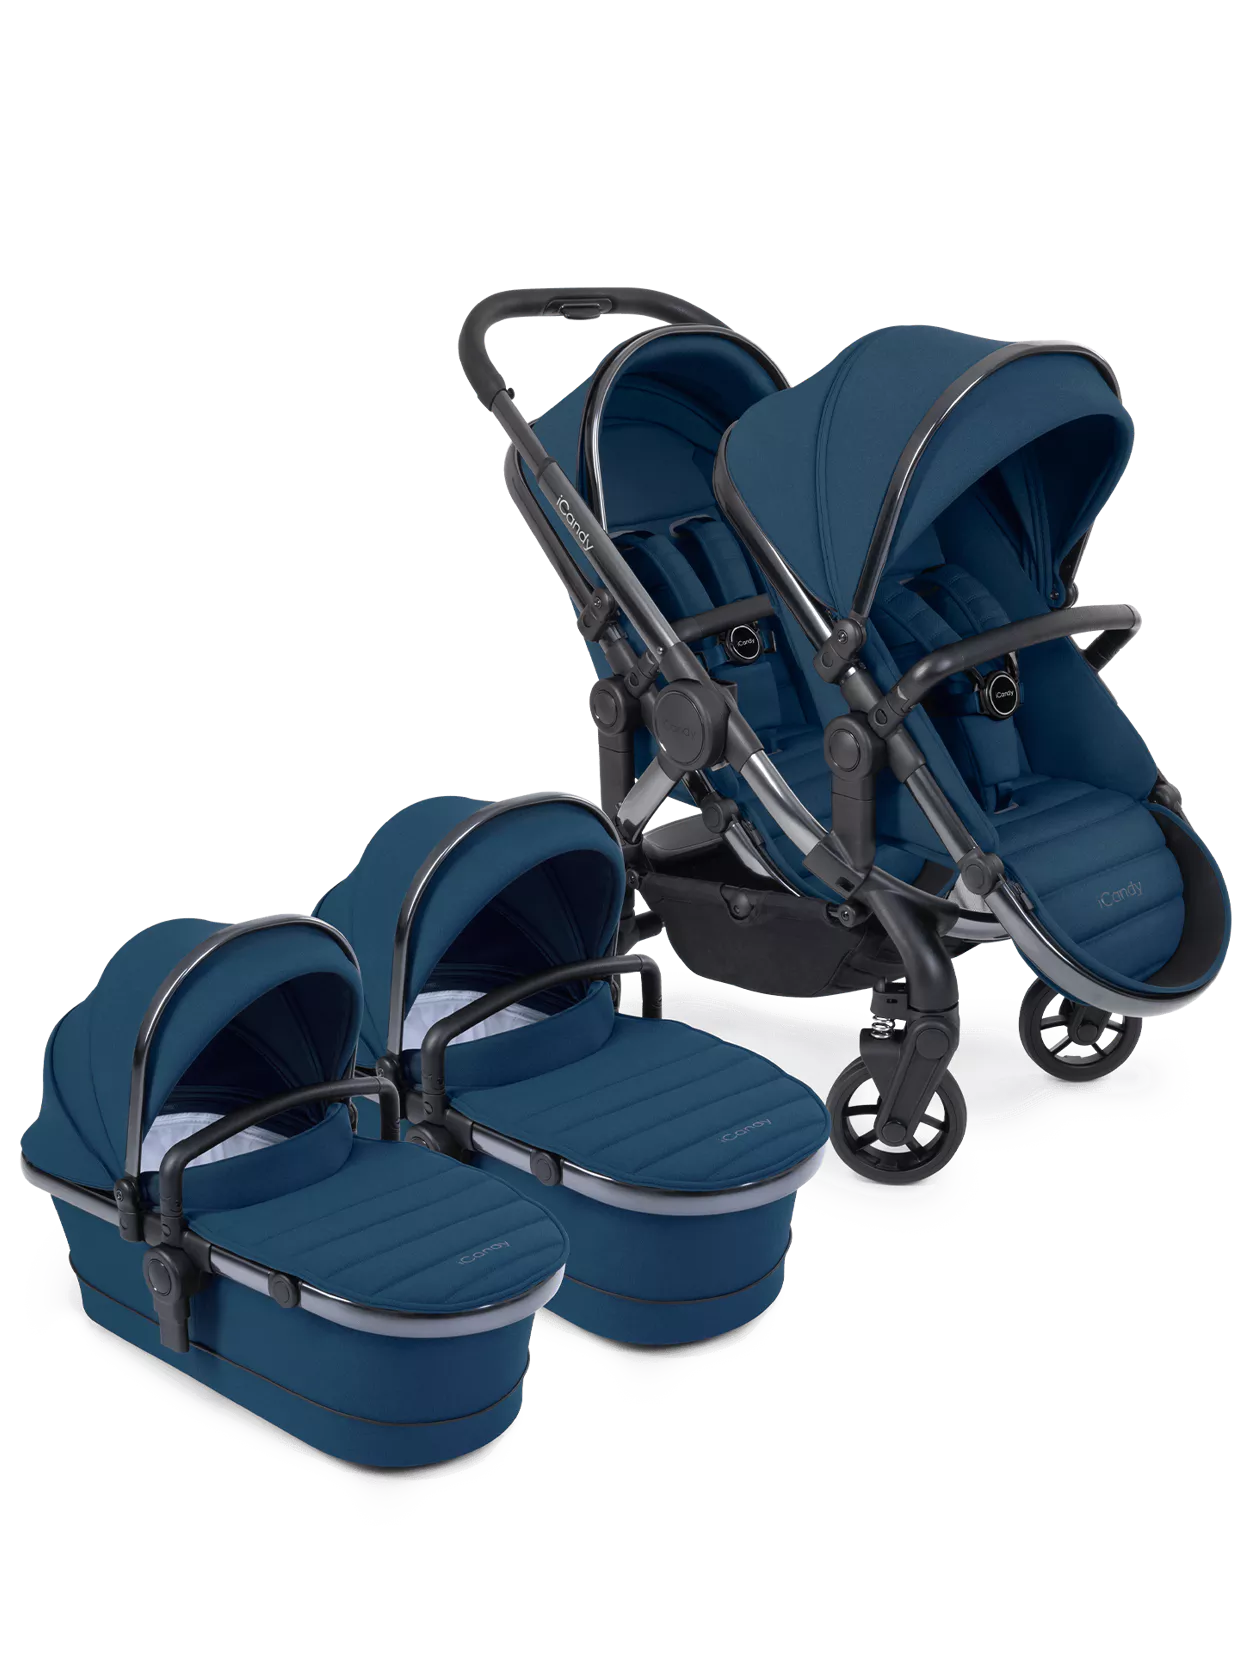 iCandy Peach 7 Pushchair and Carrycot - Twin